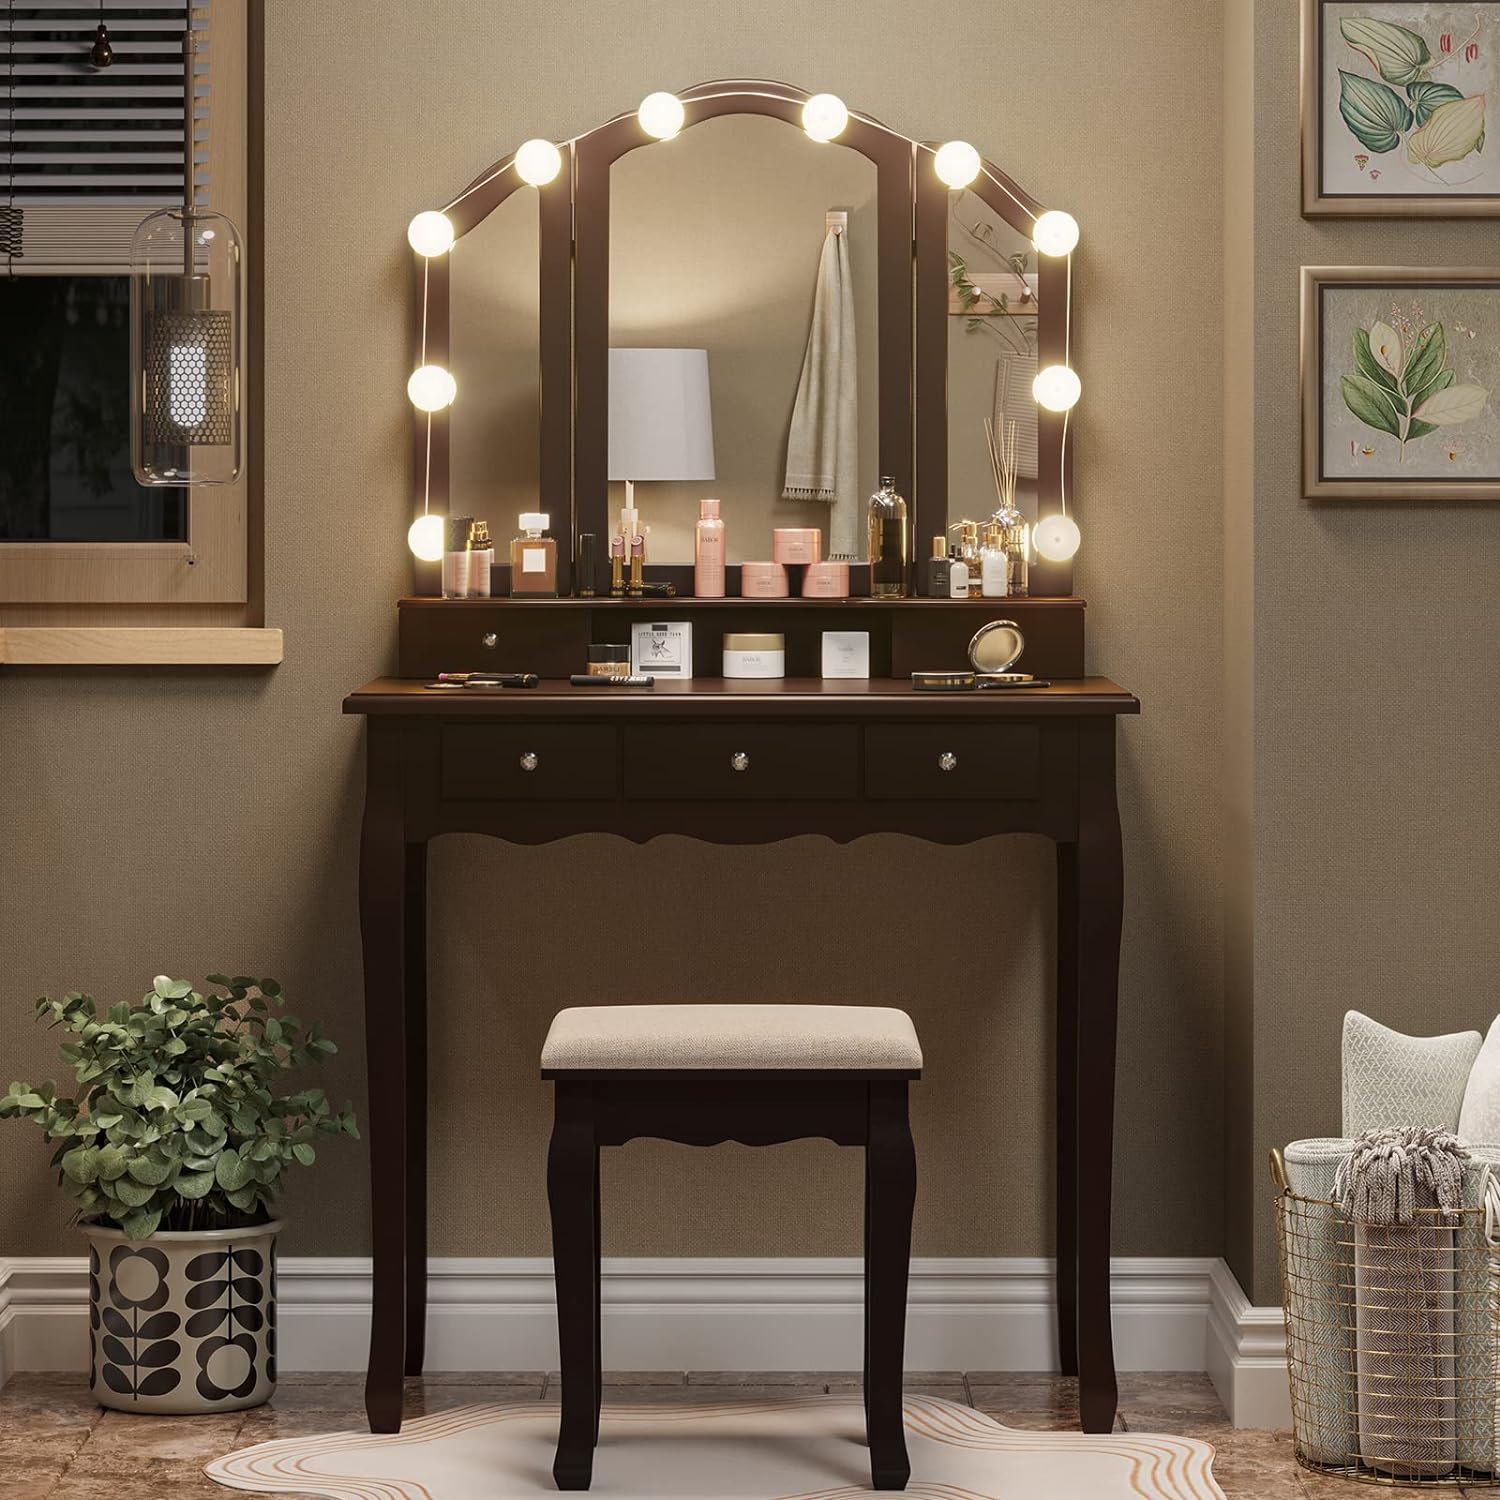 Tiptiper Vanity Desk, Makeup Vanity Set with Lighted Mirror and Stool, Dressing Table with 5 Drawers, 3 Light Settings & Adjustable Brightness, Espresso